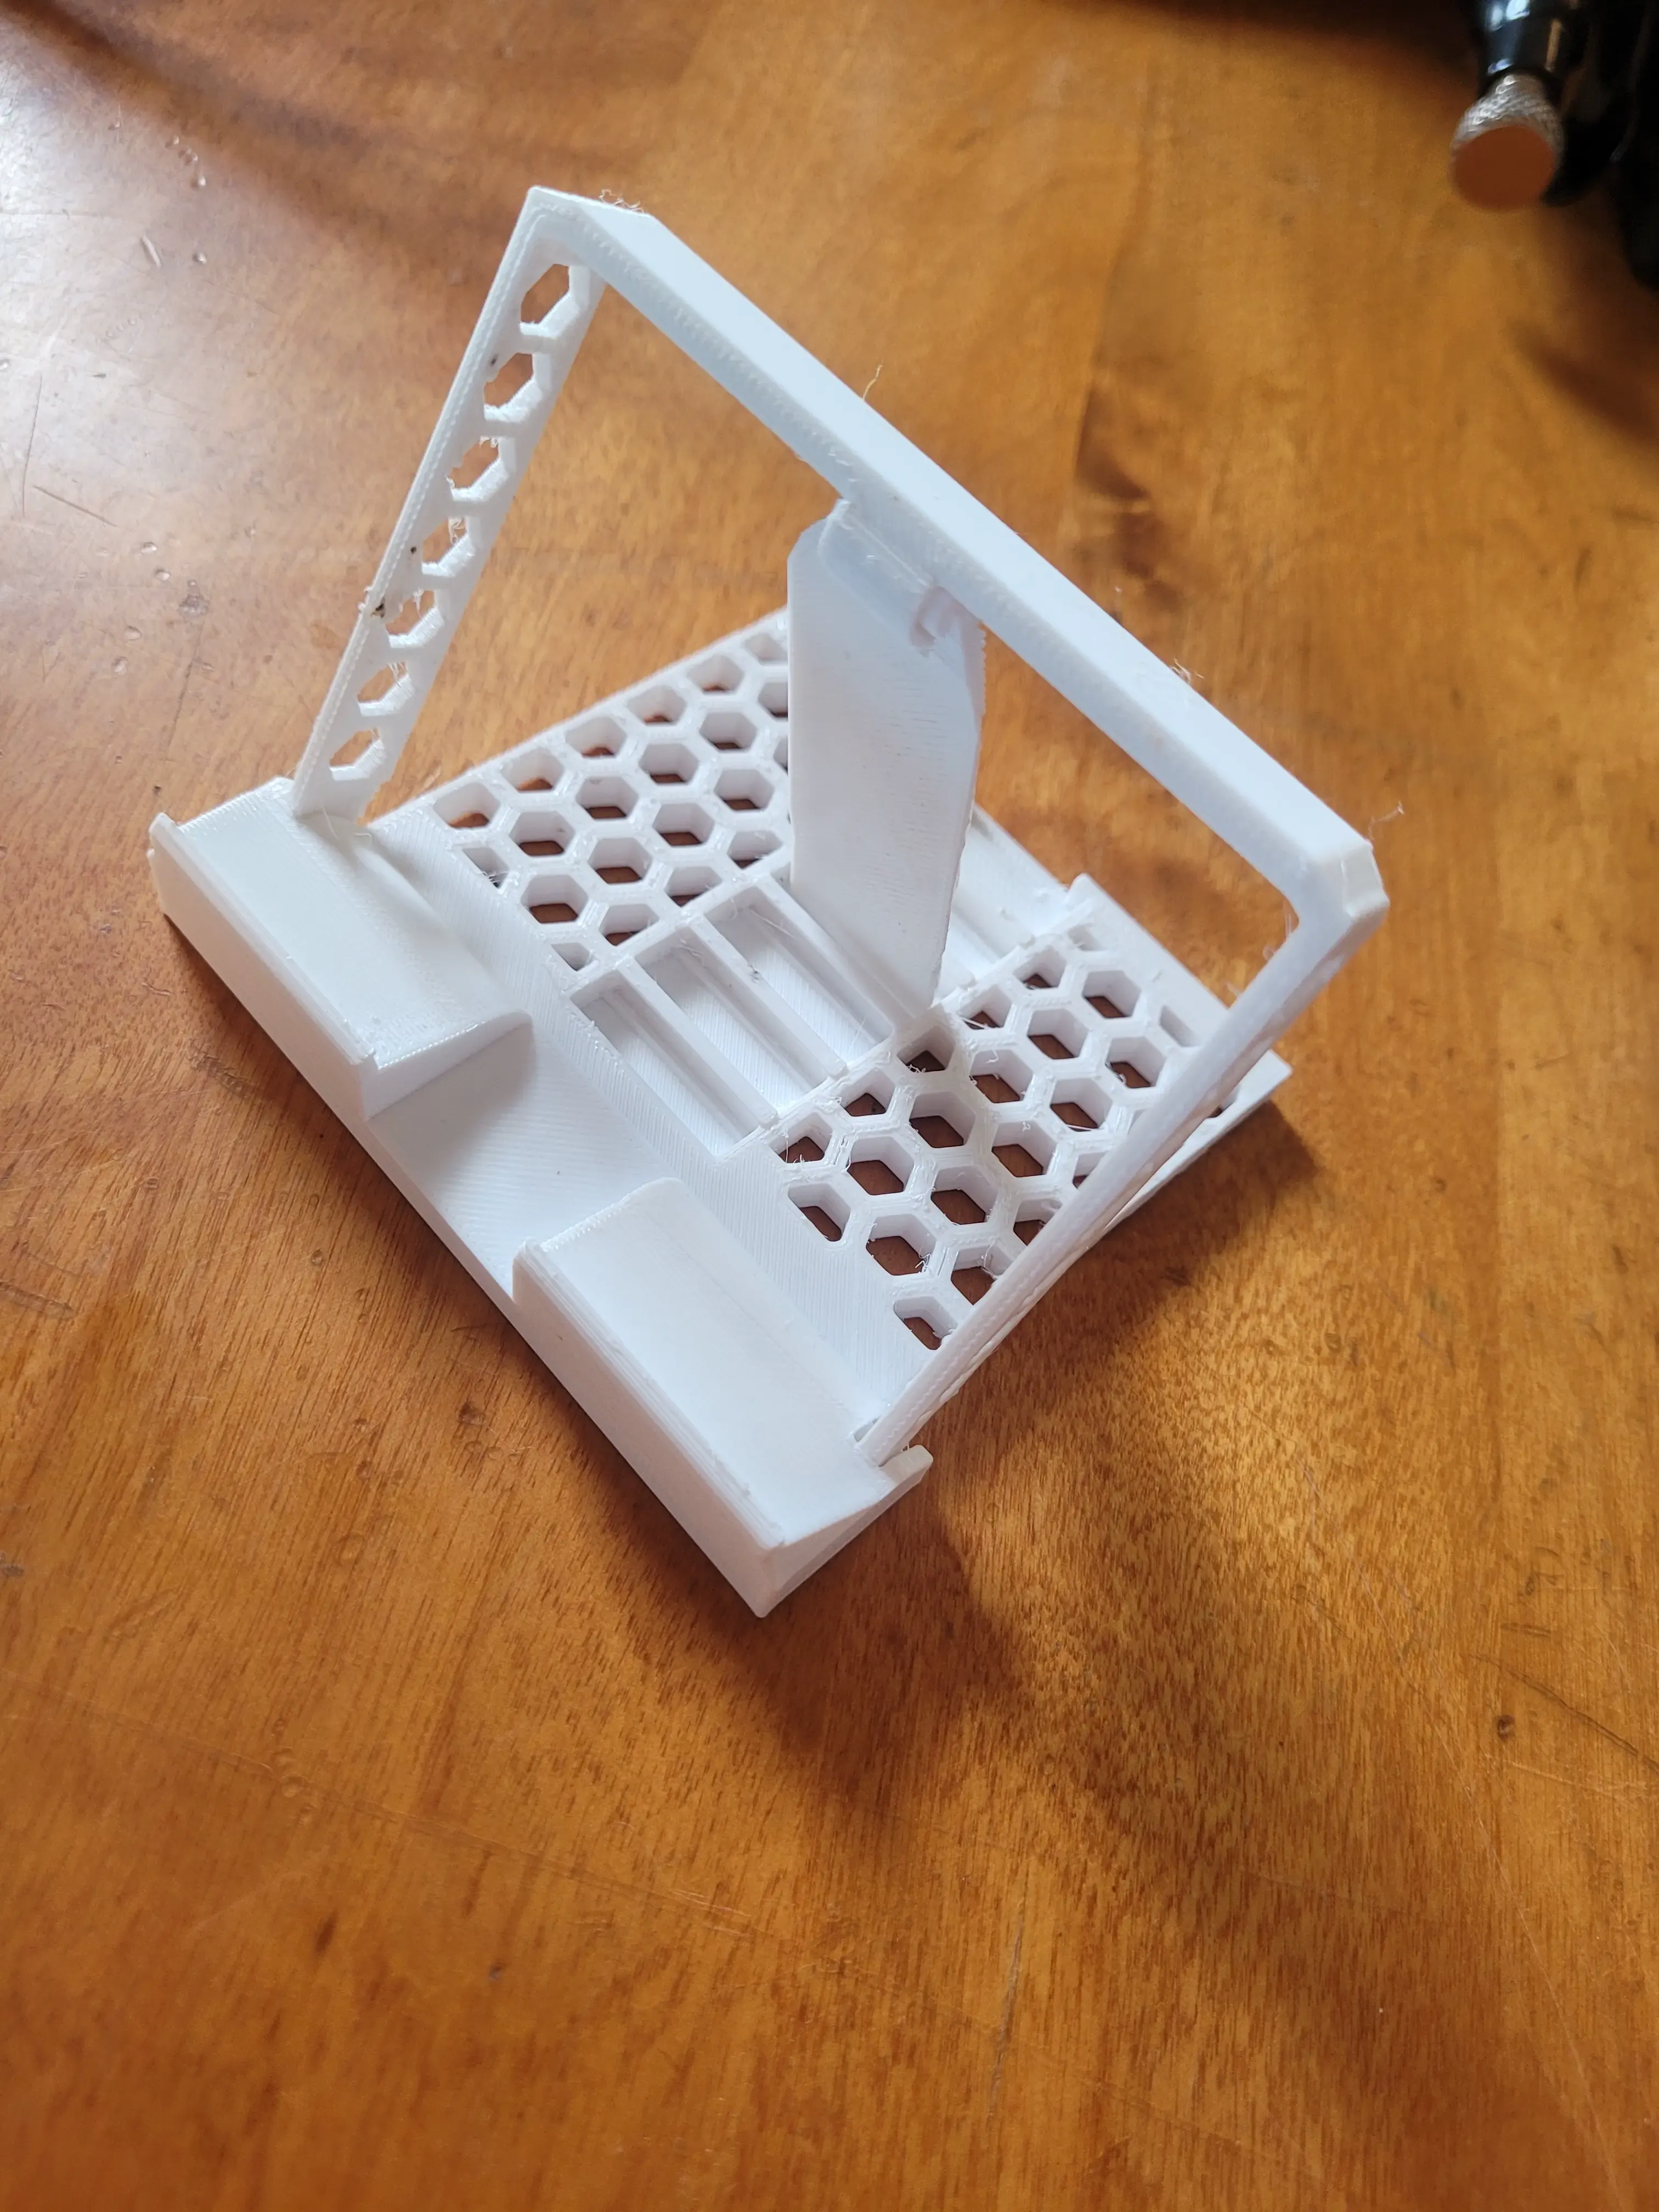 print in place phone stand 